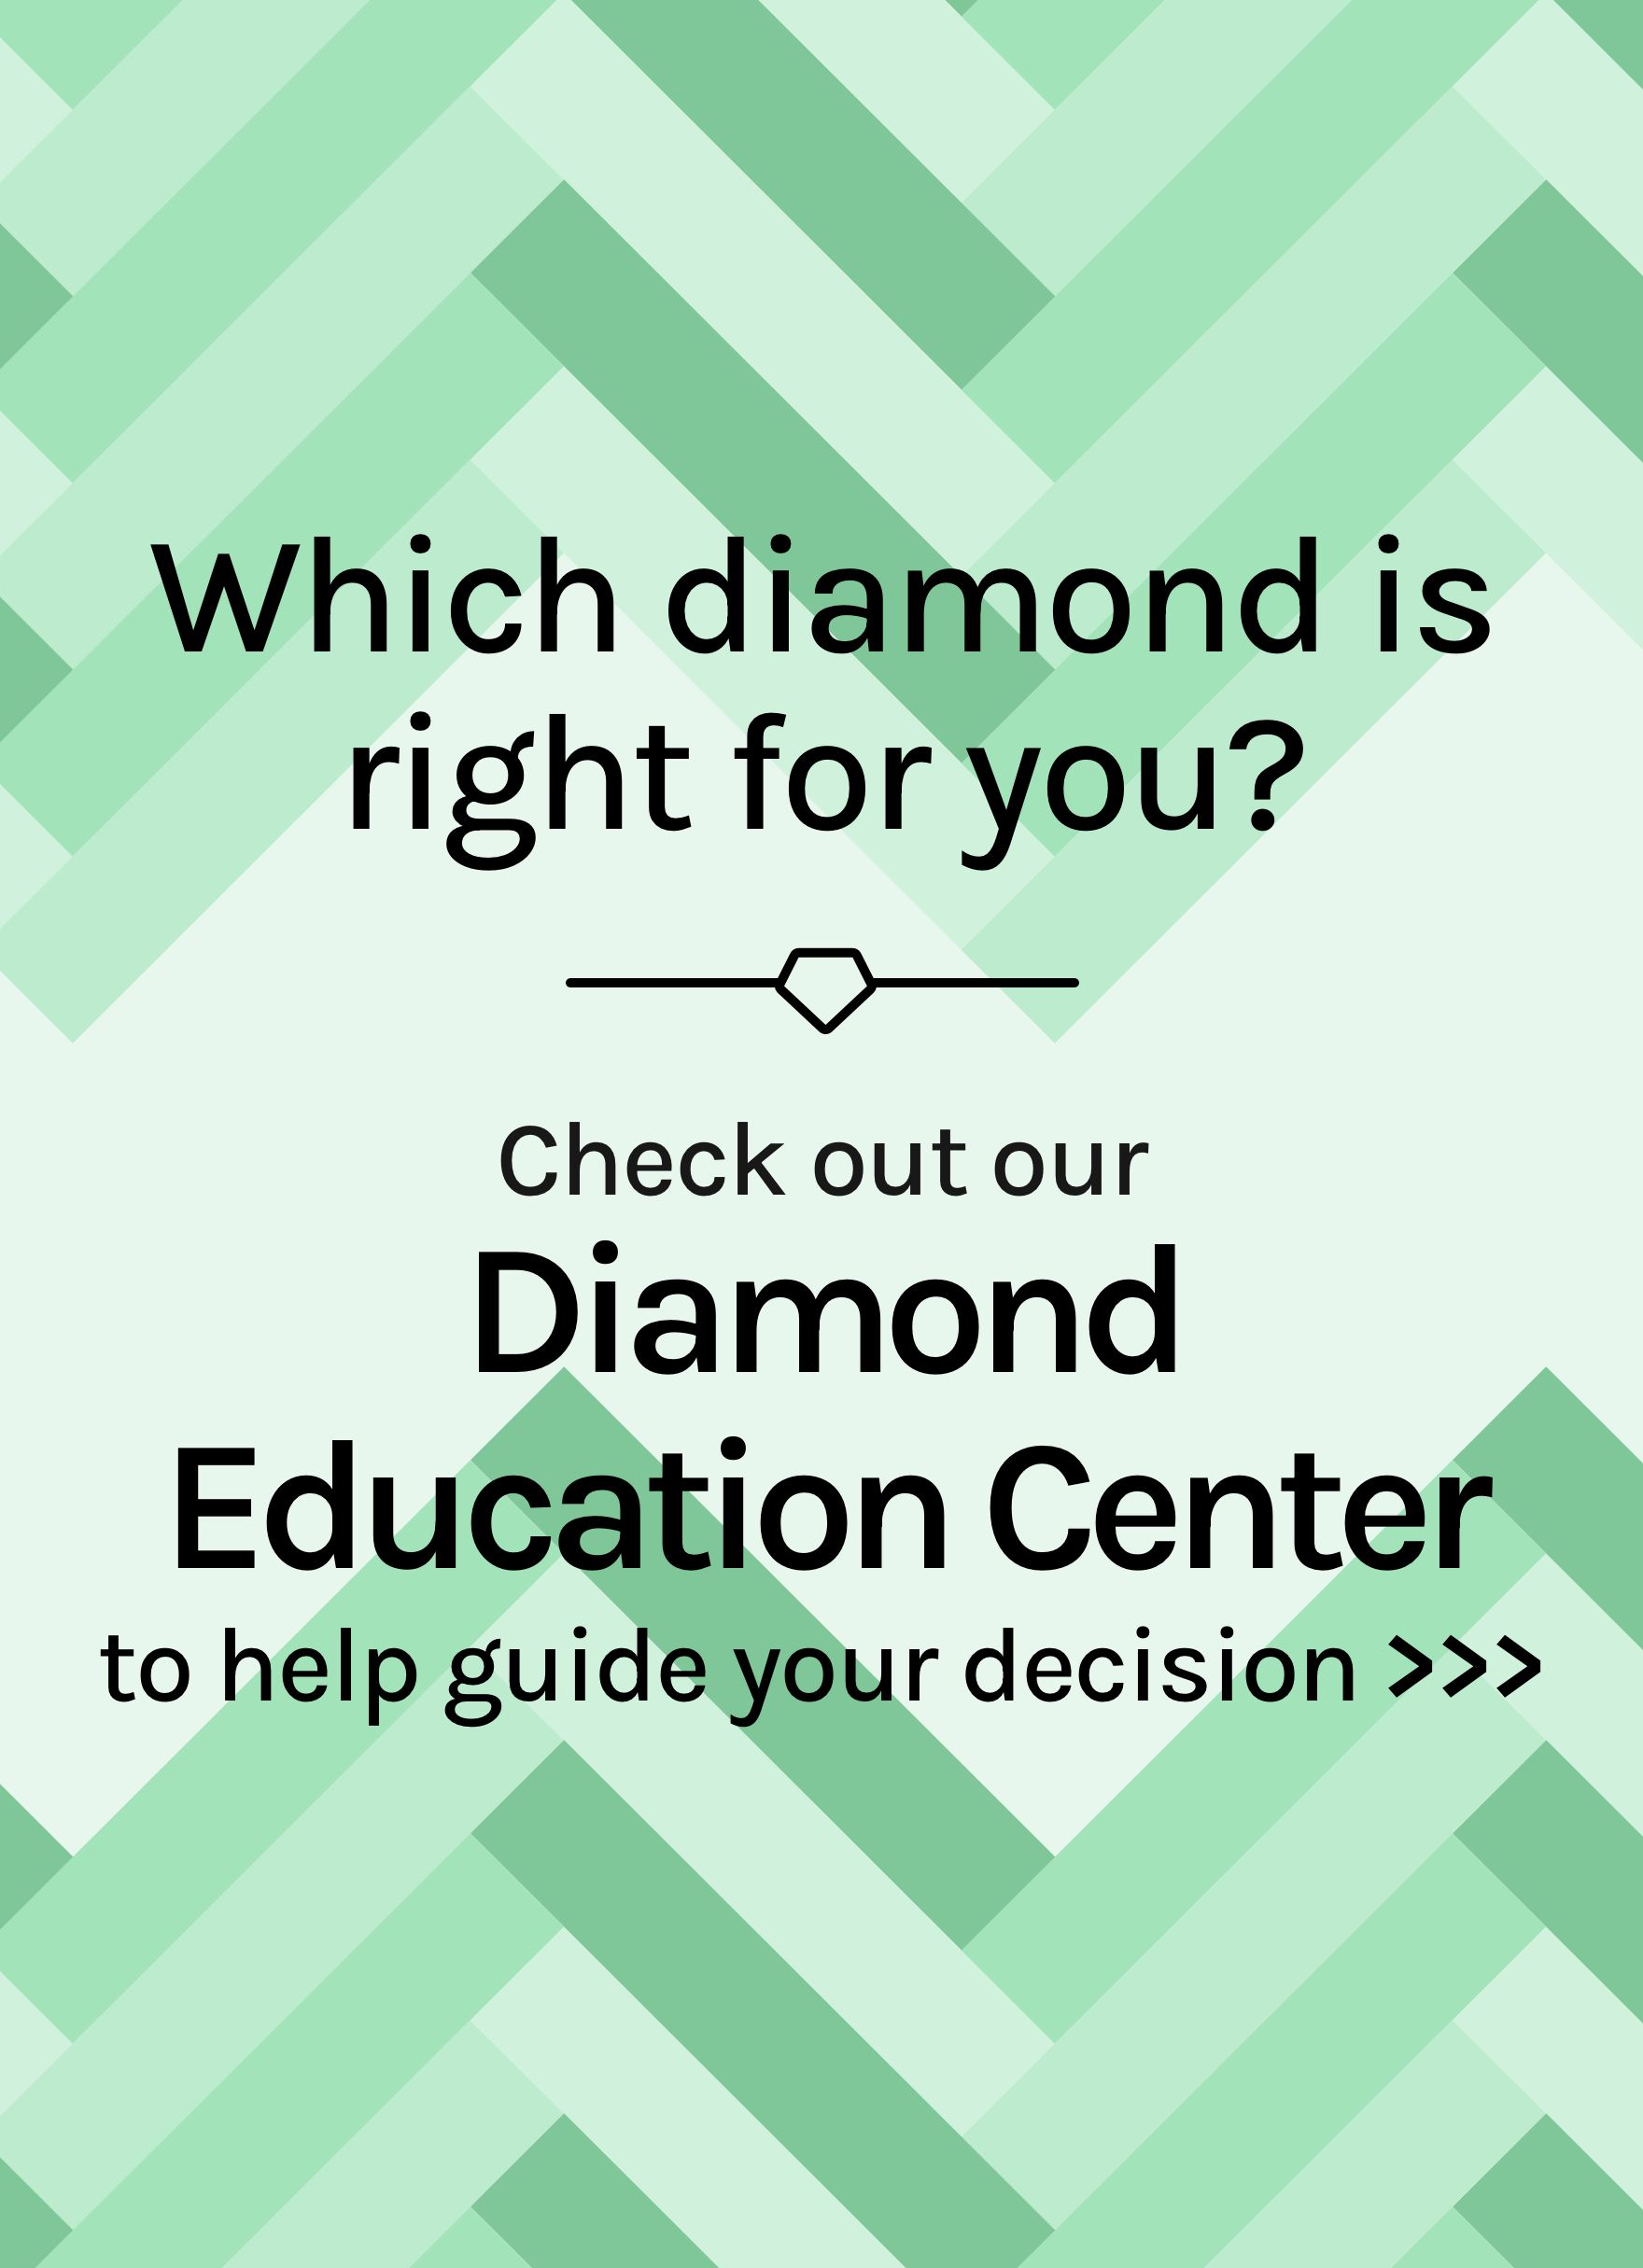 Which diamond is right for you? Check out our Diamond Education Center to help guide your decision. 